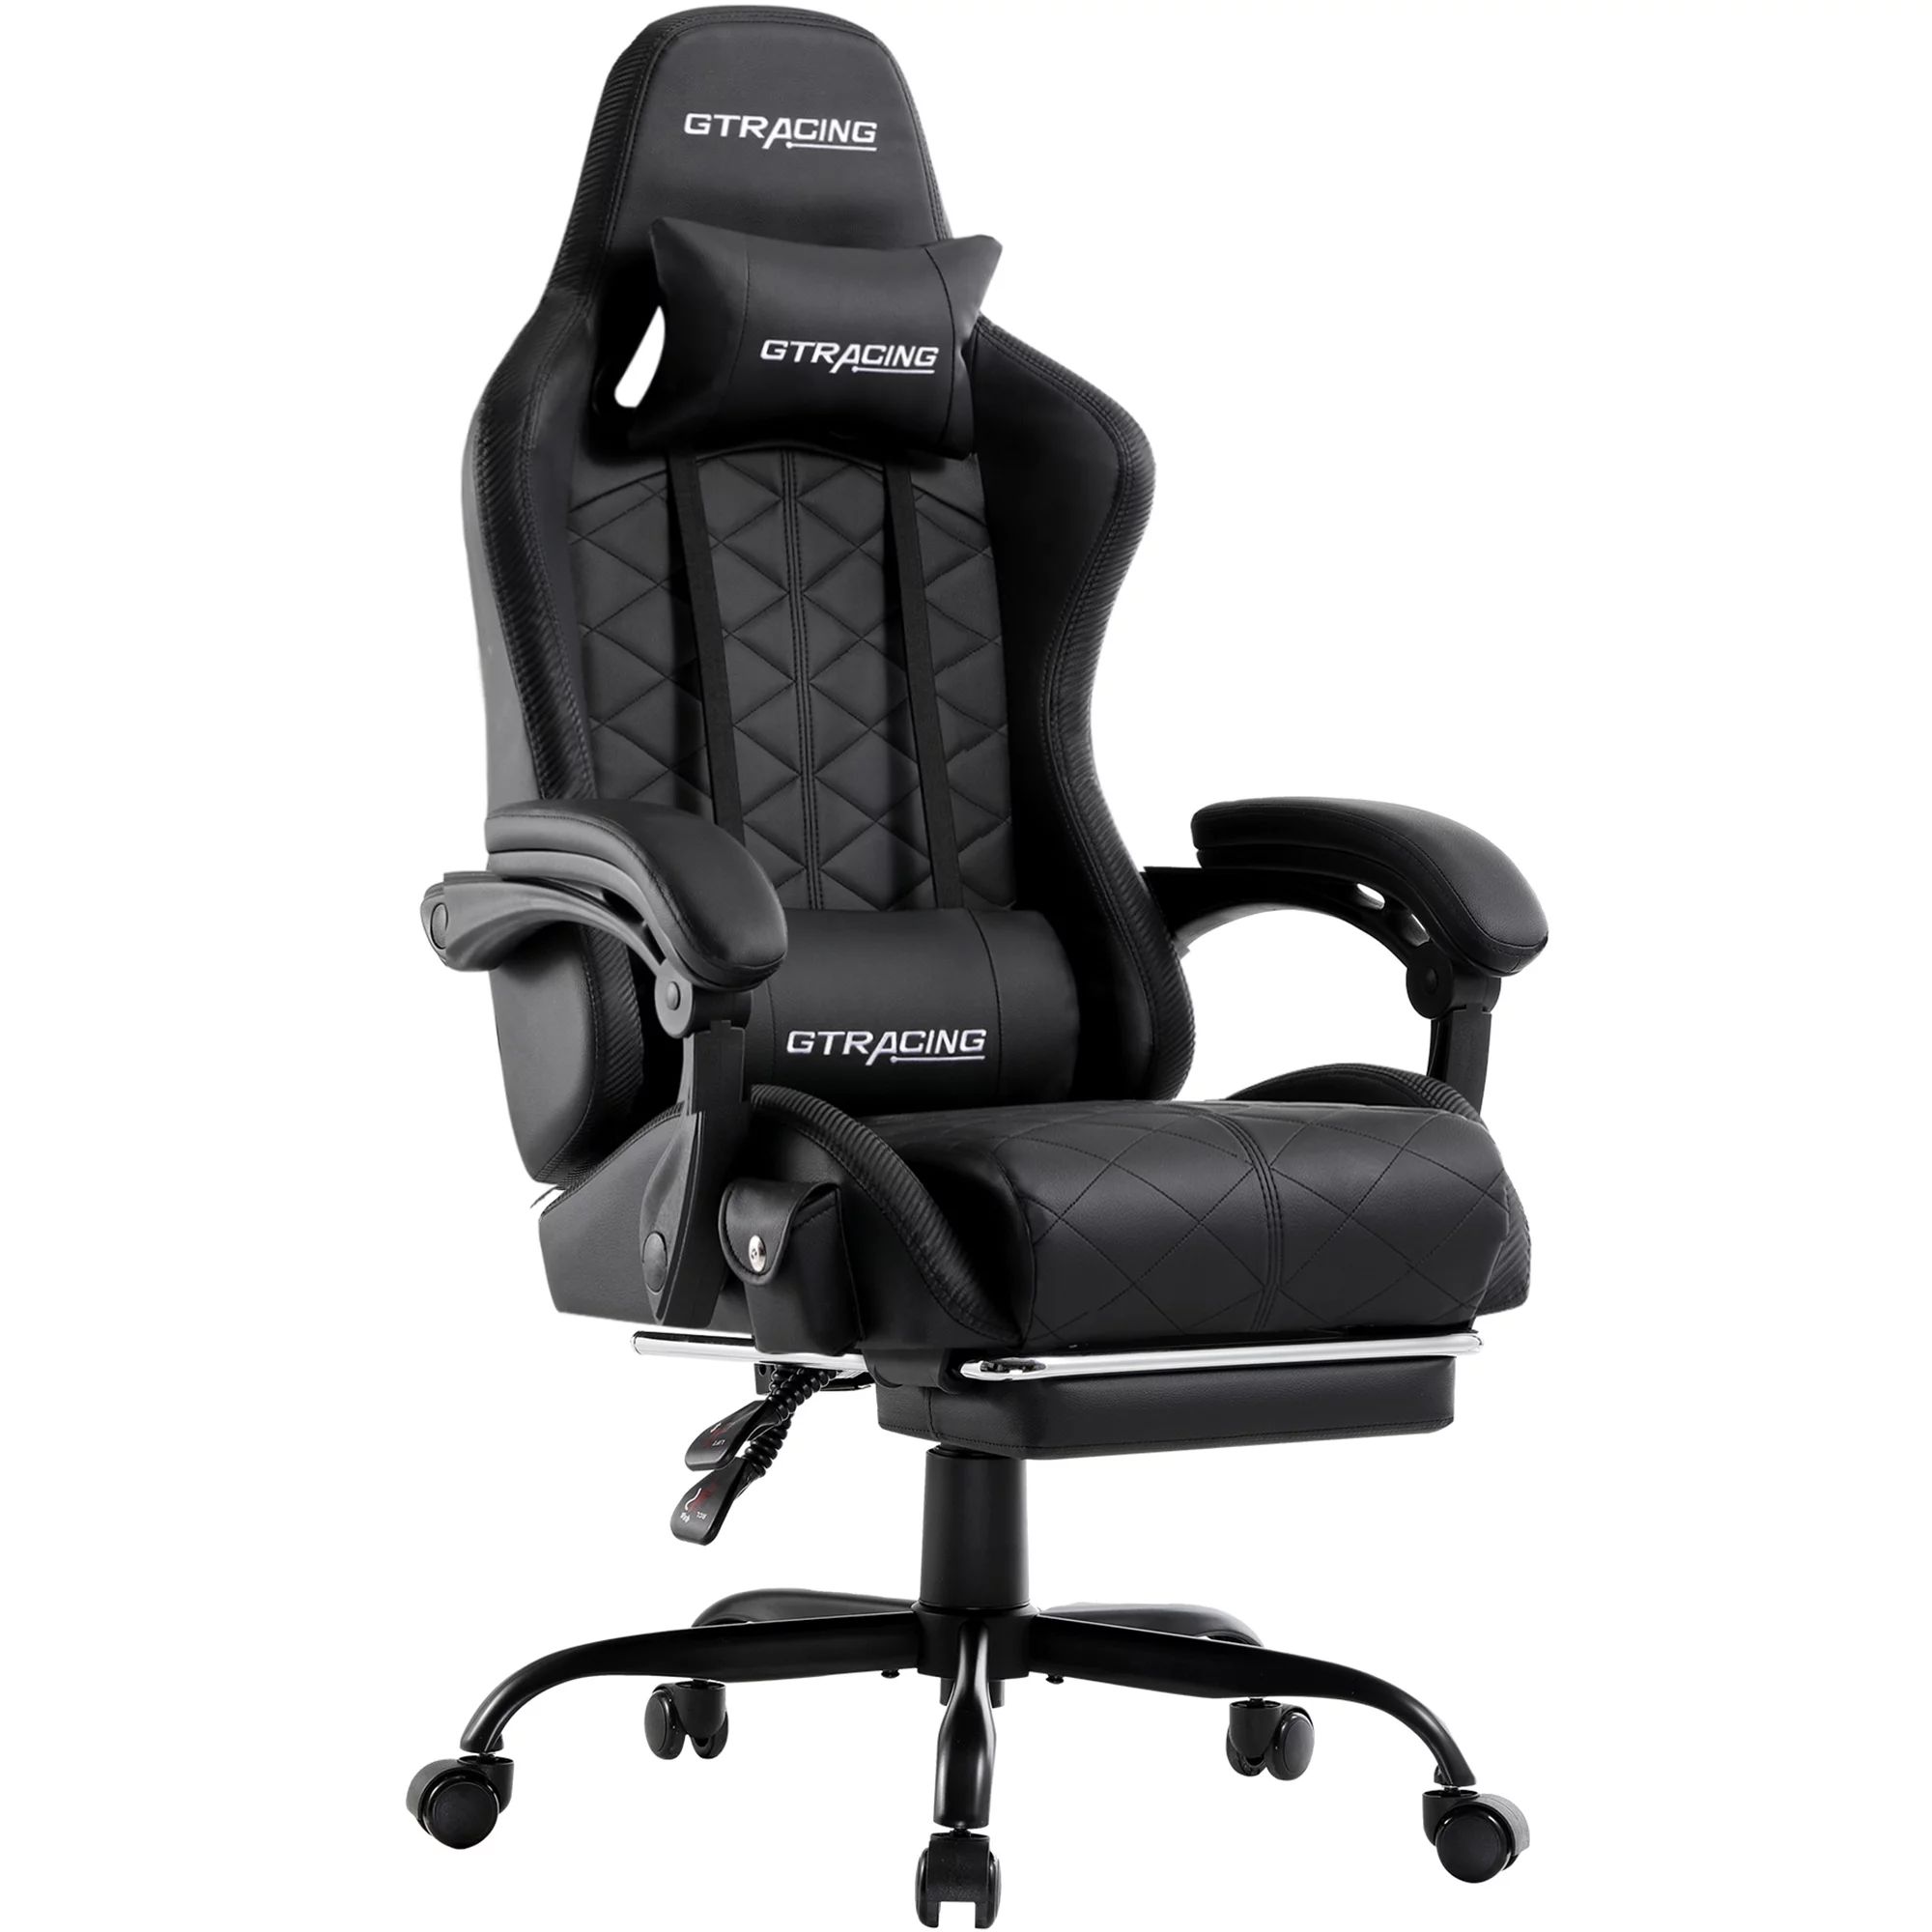 GTRACING GTW-100 Reclining Office Gaming Chair with Bluetooth Speakers and Footrest, Black | Walmart (US)